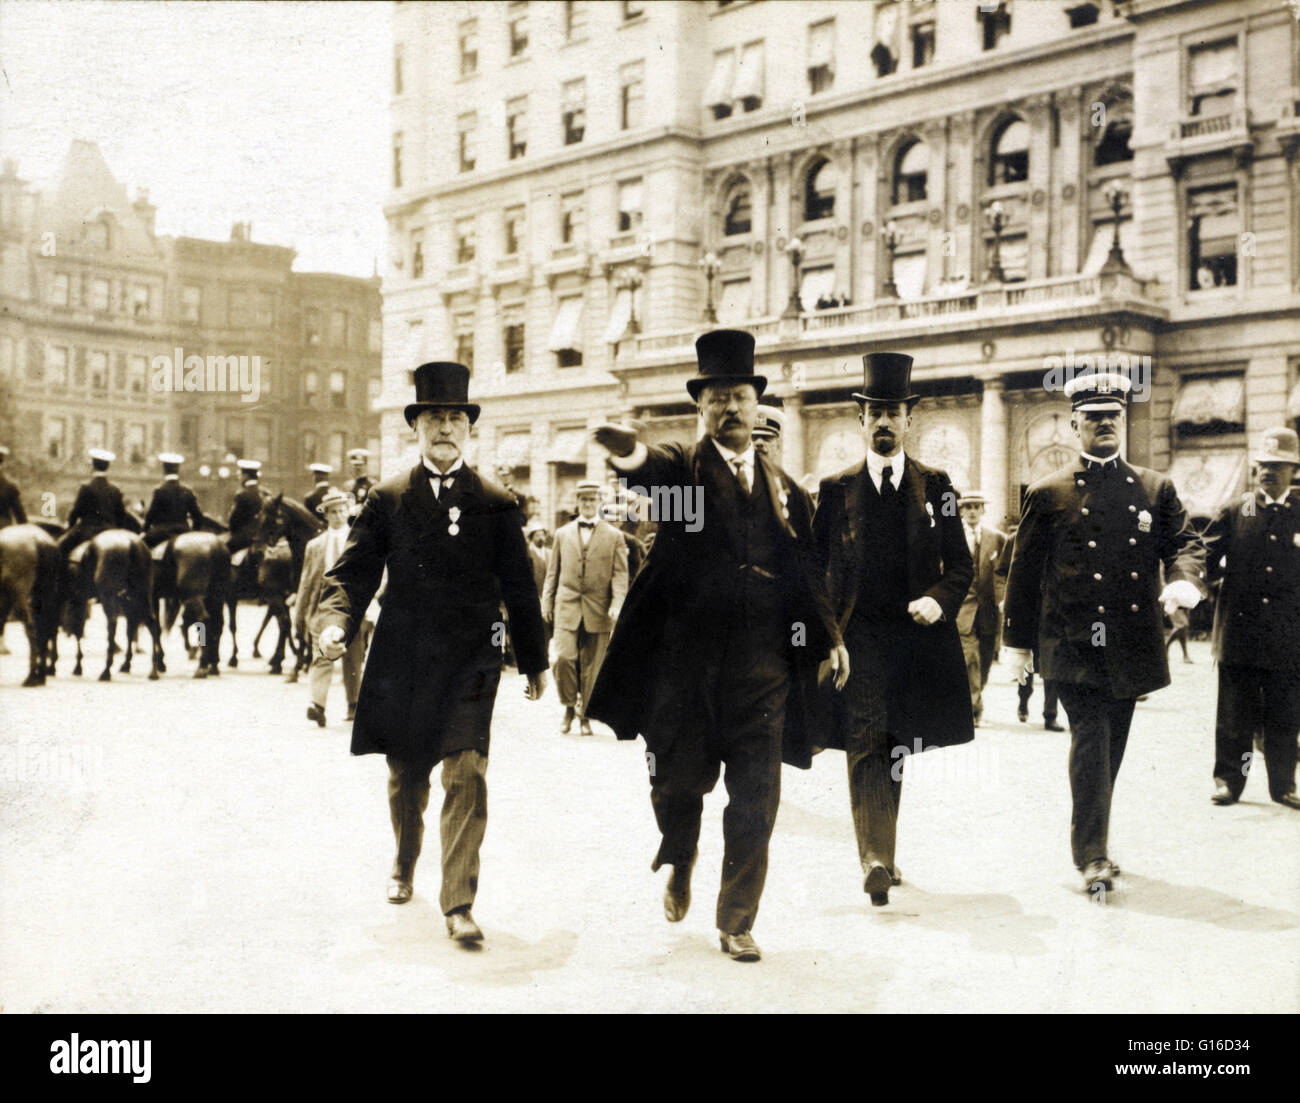 Theodore Roosevelt walking in a homecoming parade with New York City Mayor William Gaynor and Cornelius Vanderbilt, September 14, 1910. Theodore 'Teddy' Roosevelt (October 27, 1858 - January 6, 1919) was the 26th President of the United States (1901-1909) Stock Photo